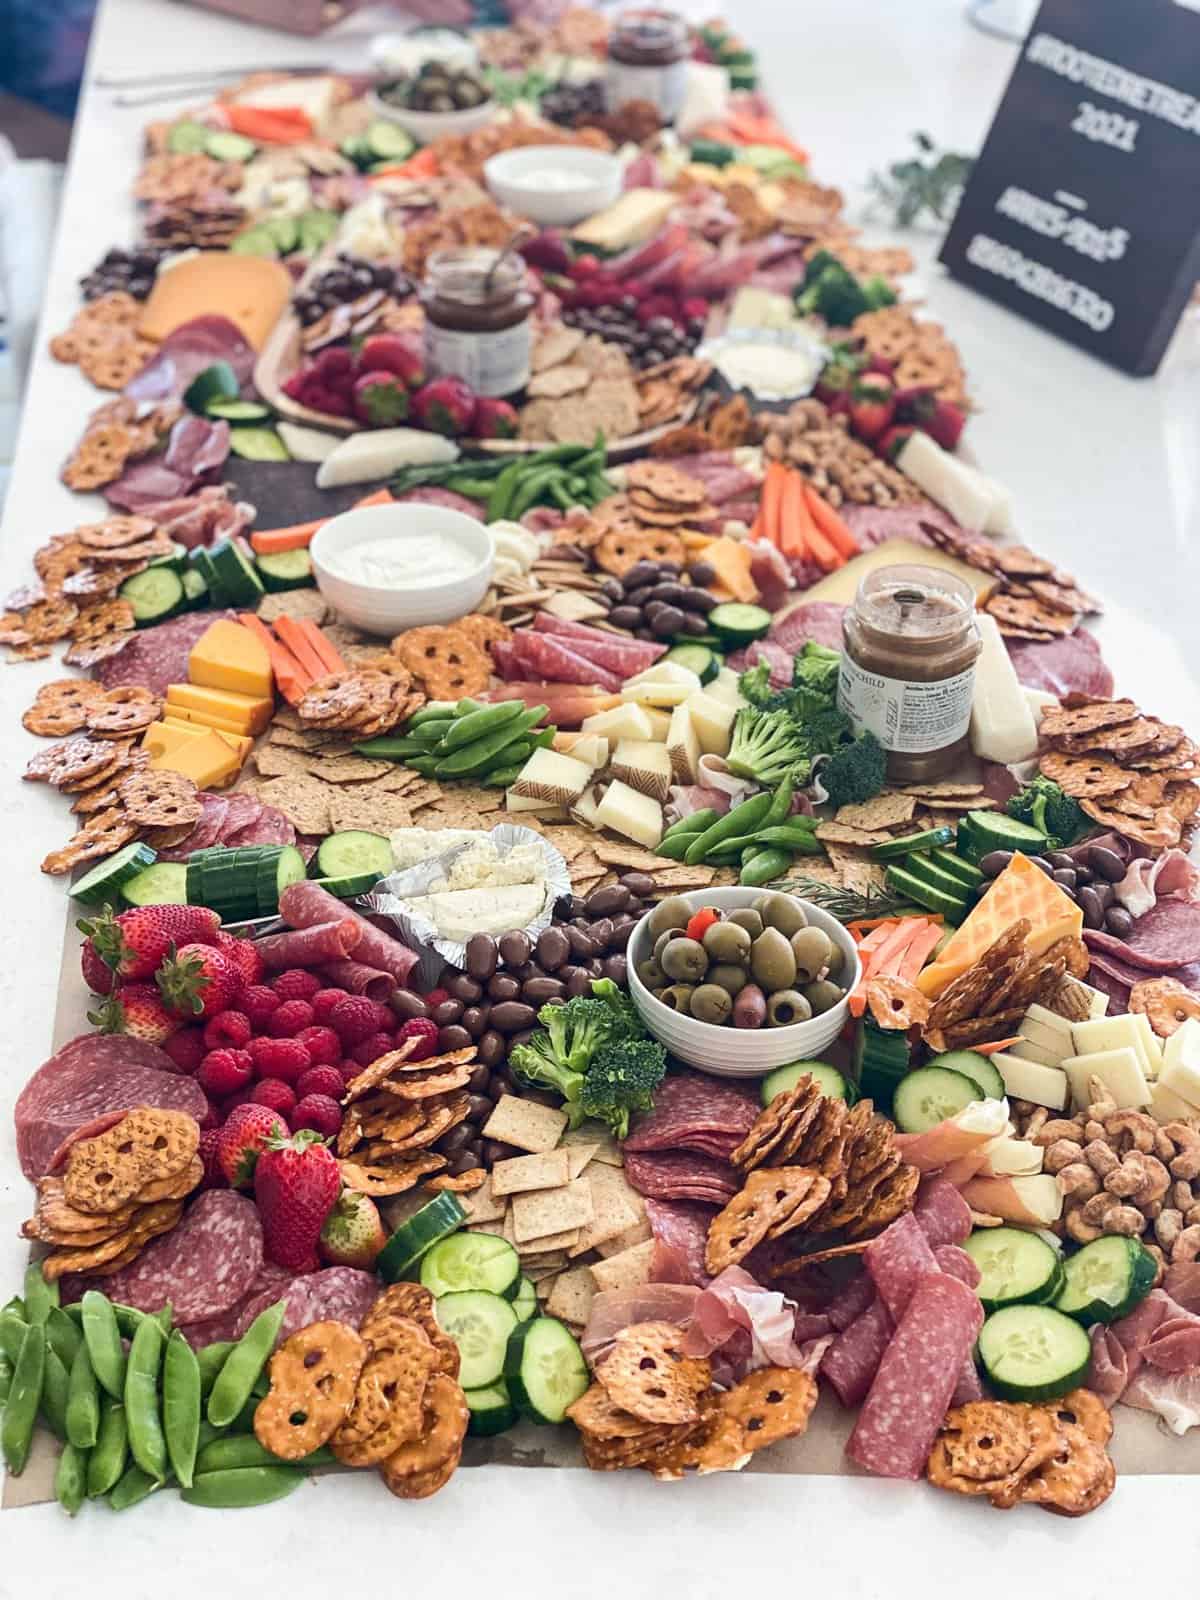 Simple Lunch Charcuterie Board + Shopping List from My Crazy Good Life